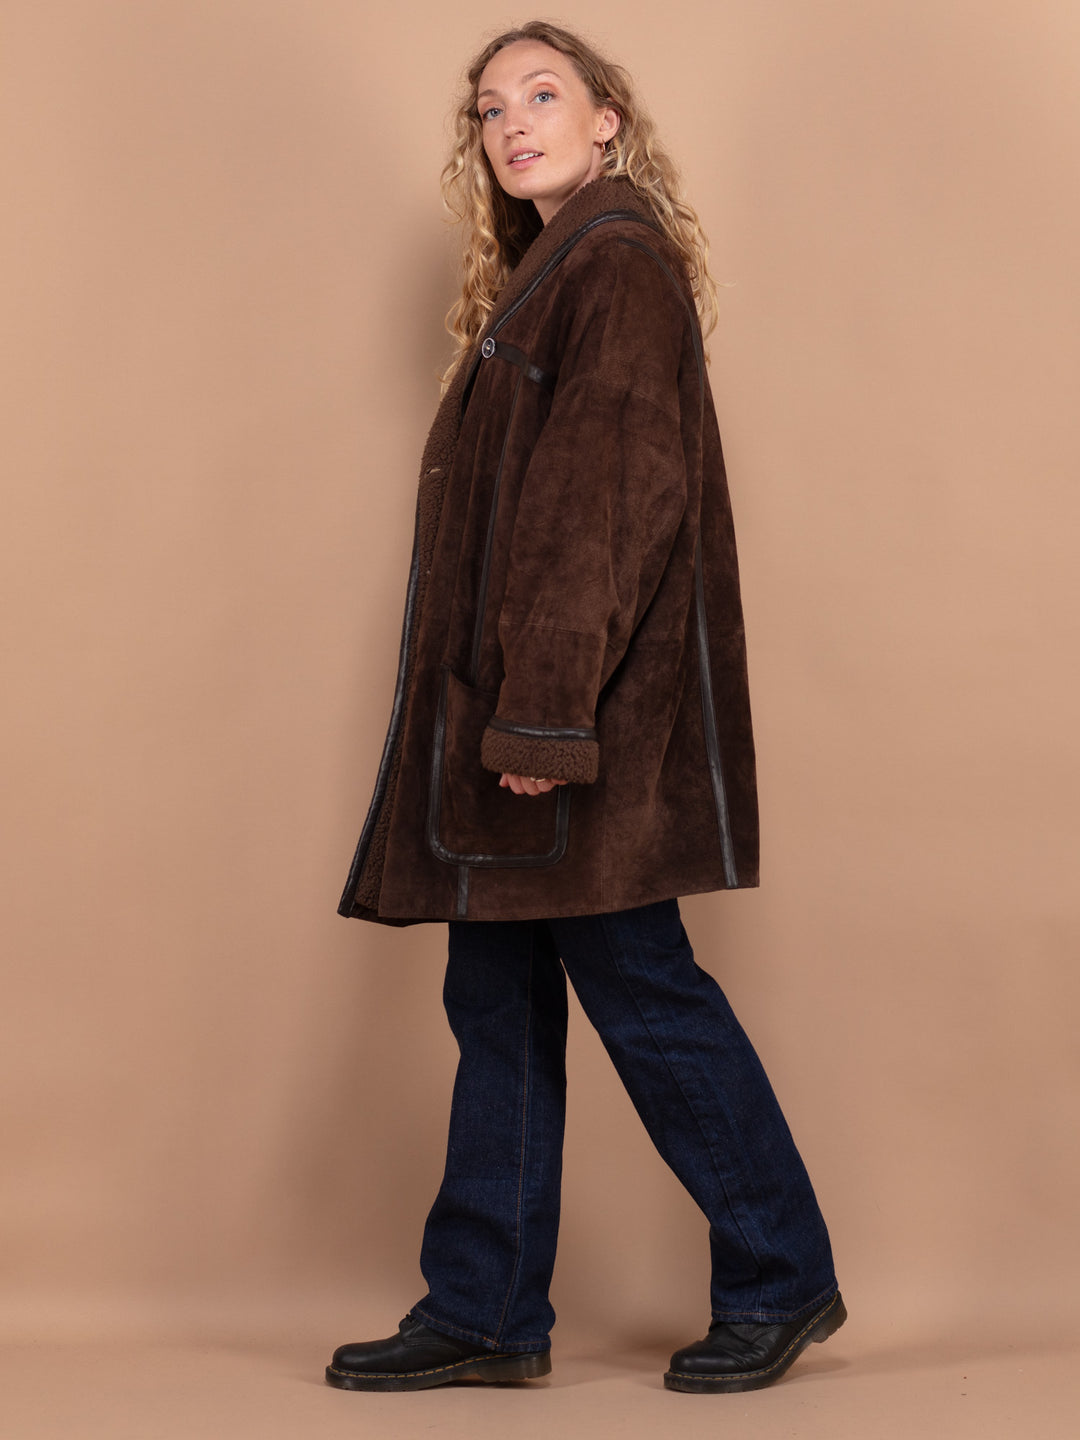 Oversized Suede Coat, 80's Brown Suede Coat Size Large XXL, Women Suede Coat, Western Style Suede Coat, Vintage Women Clothing, Pre Owned